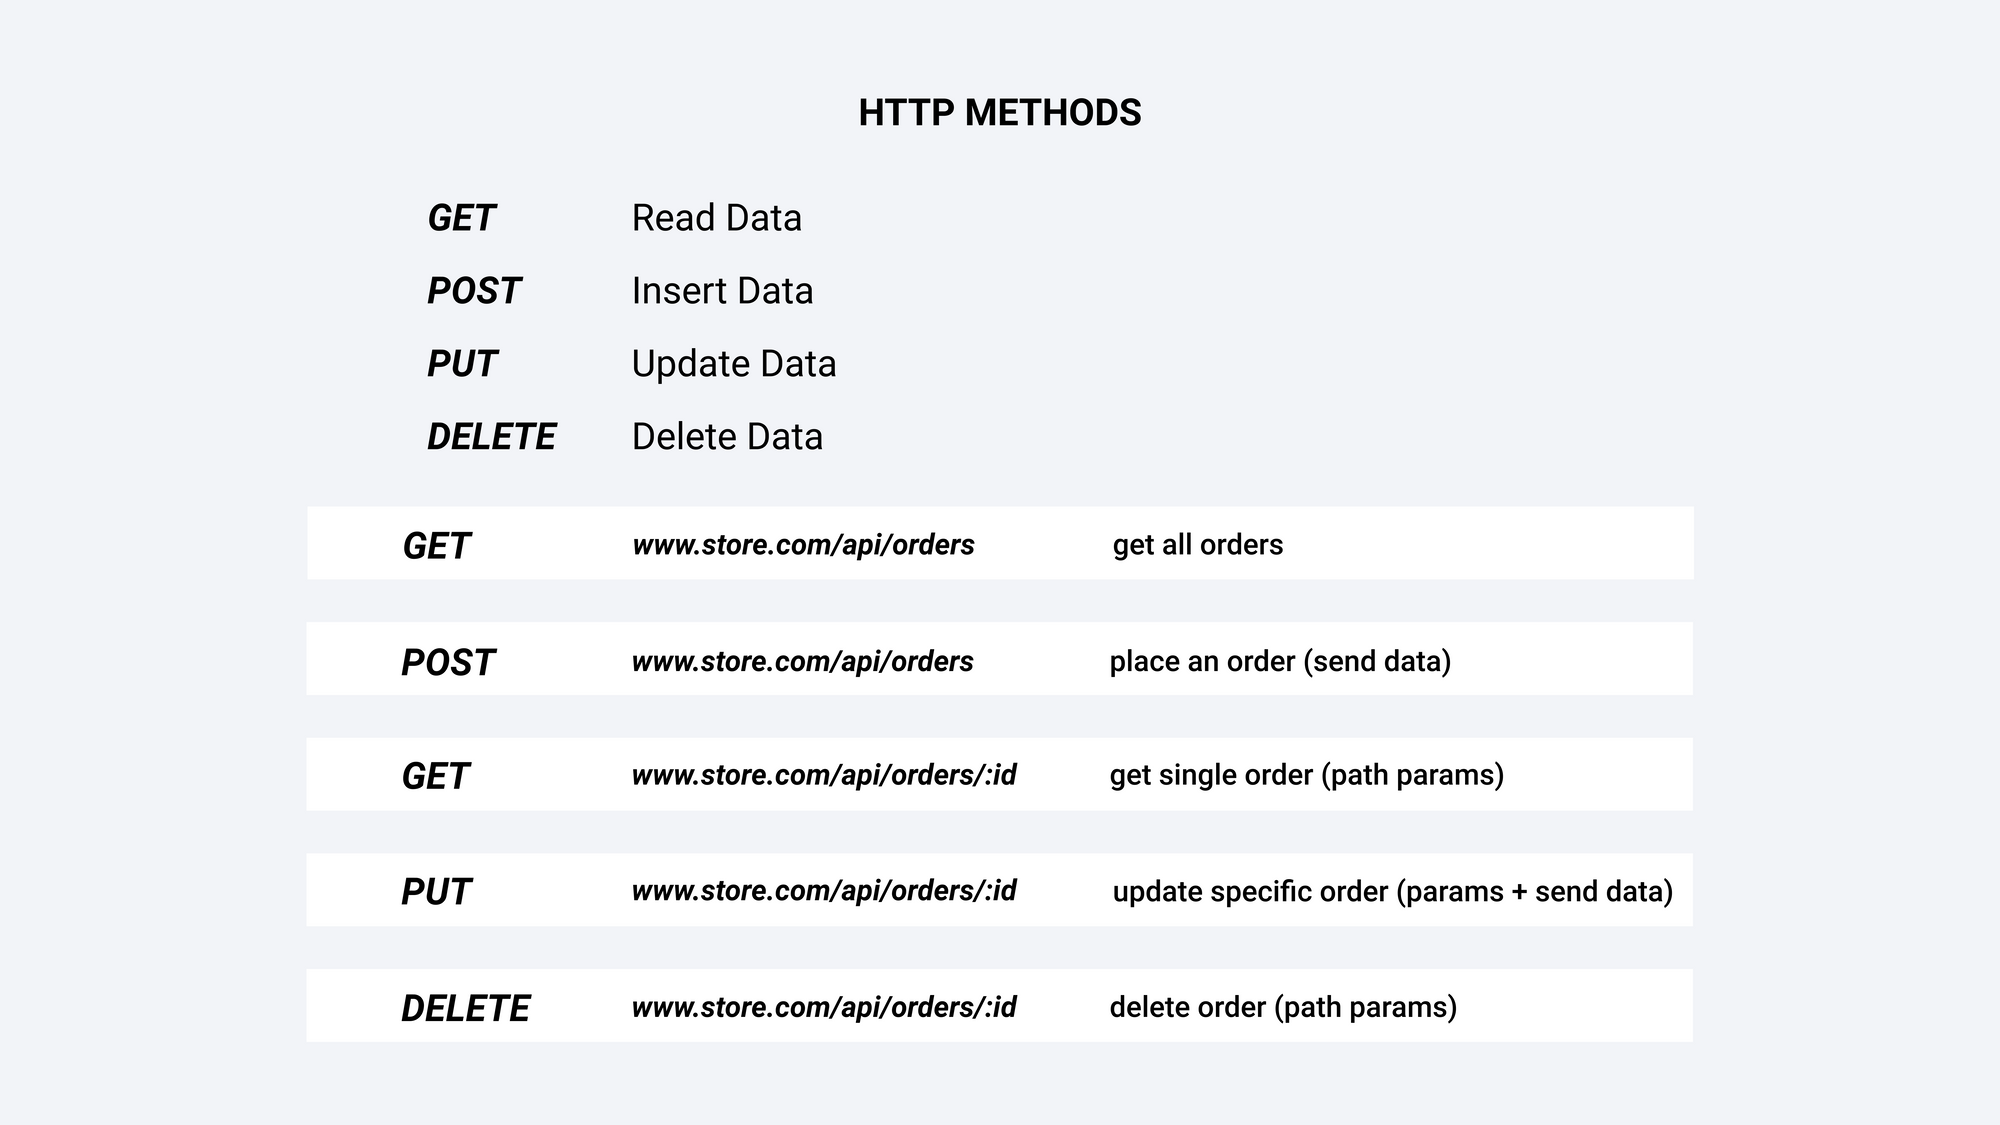 Some examples of different HTTP Methods